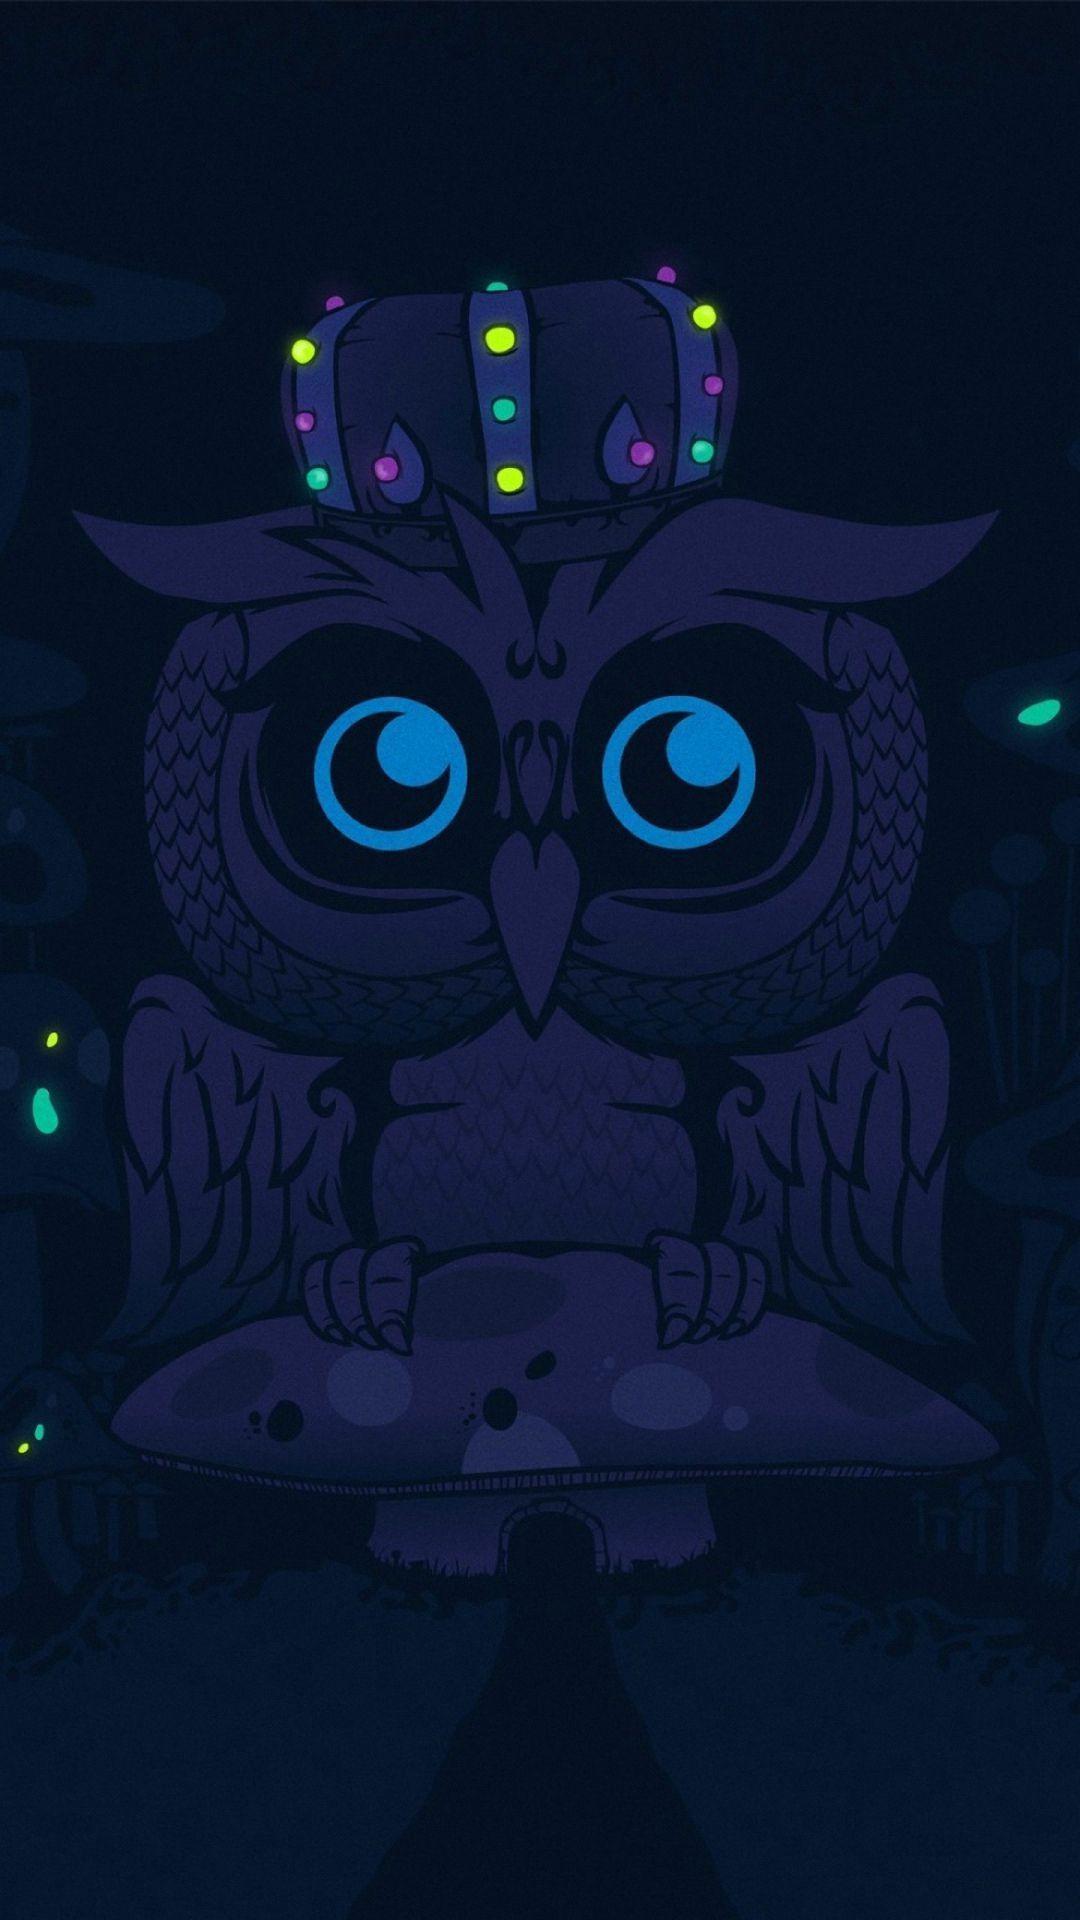 HD Cute Owl Wallpaper for Android